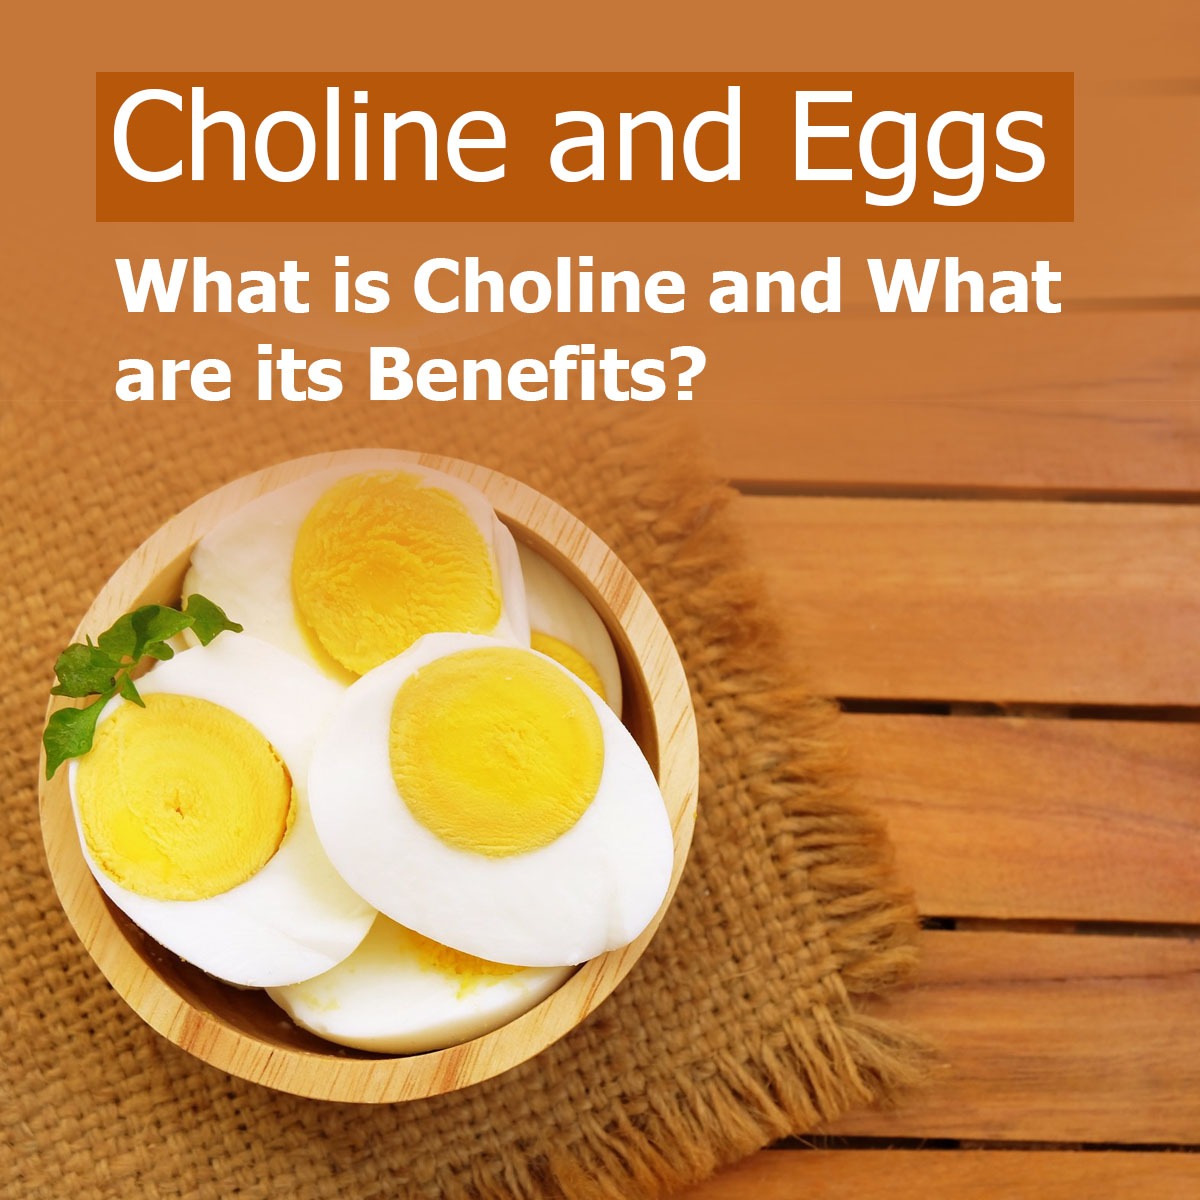 Choline and Eggs What is Choline and What are its Benefits